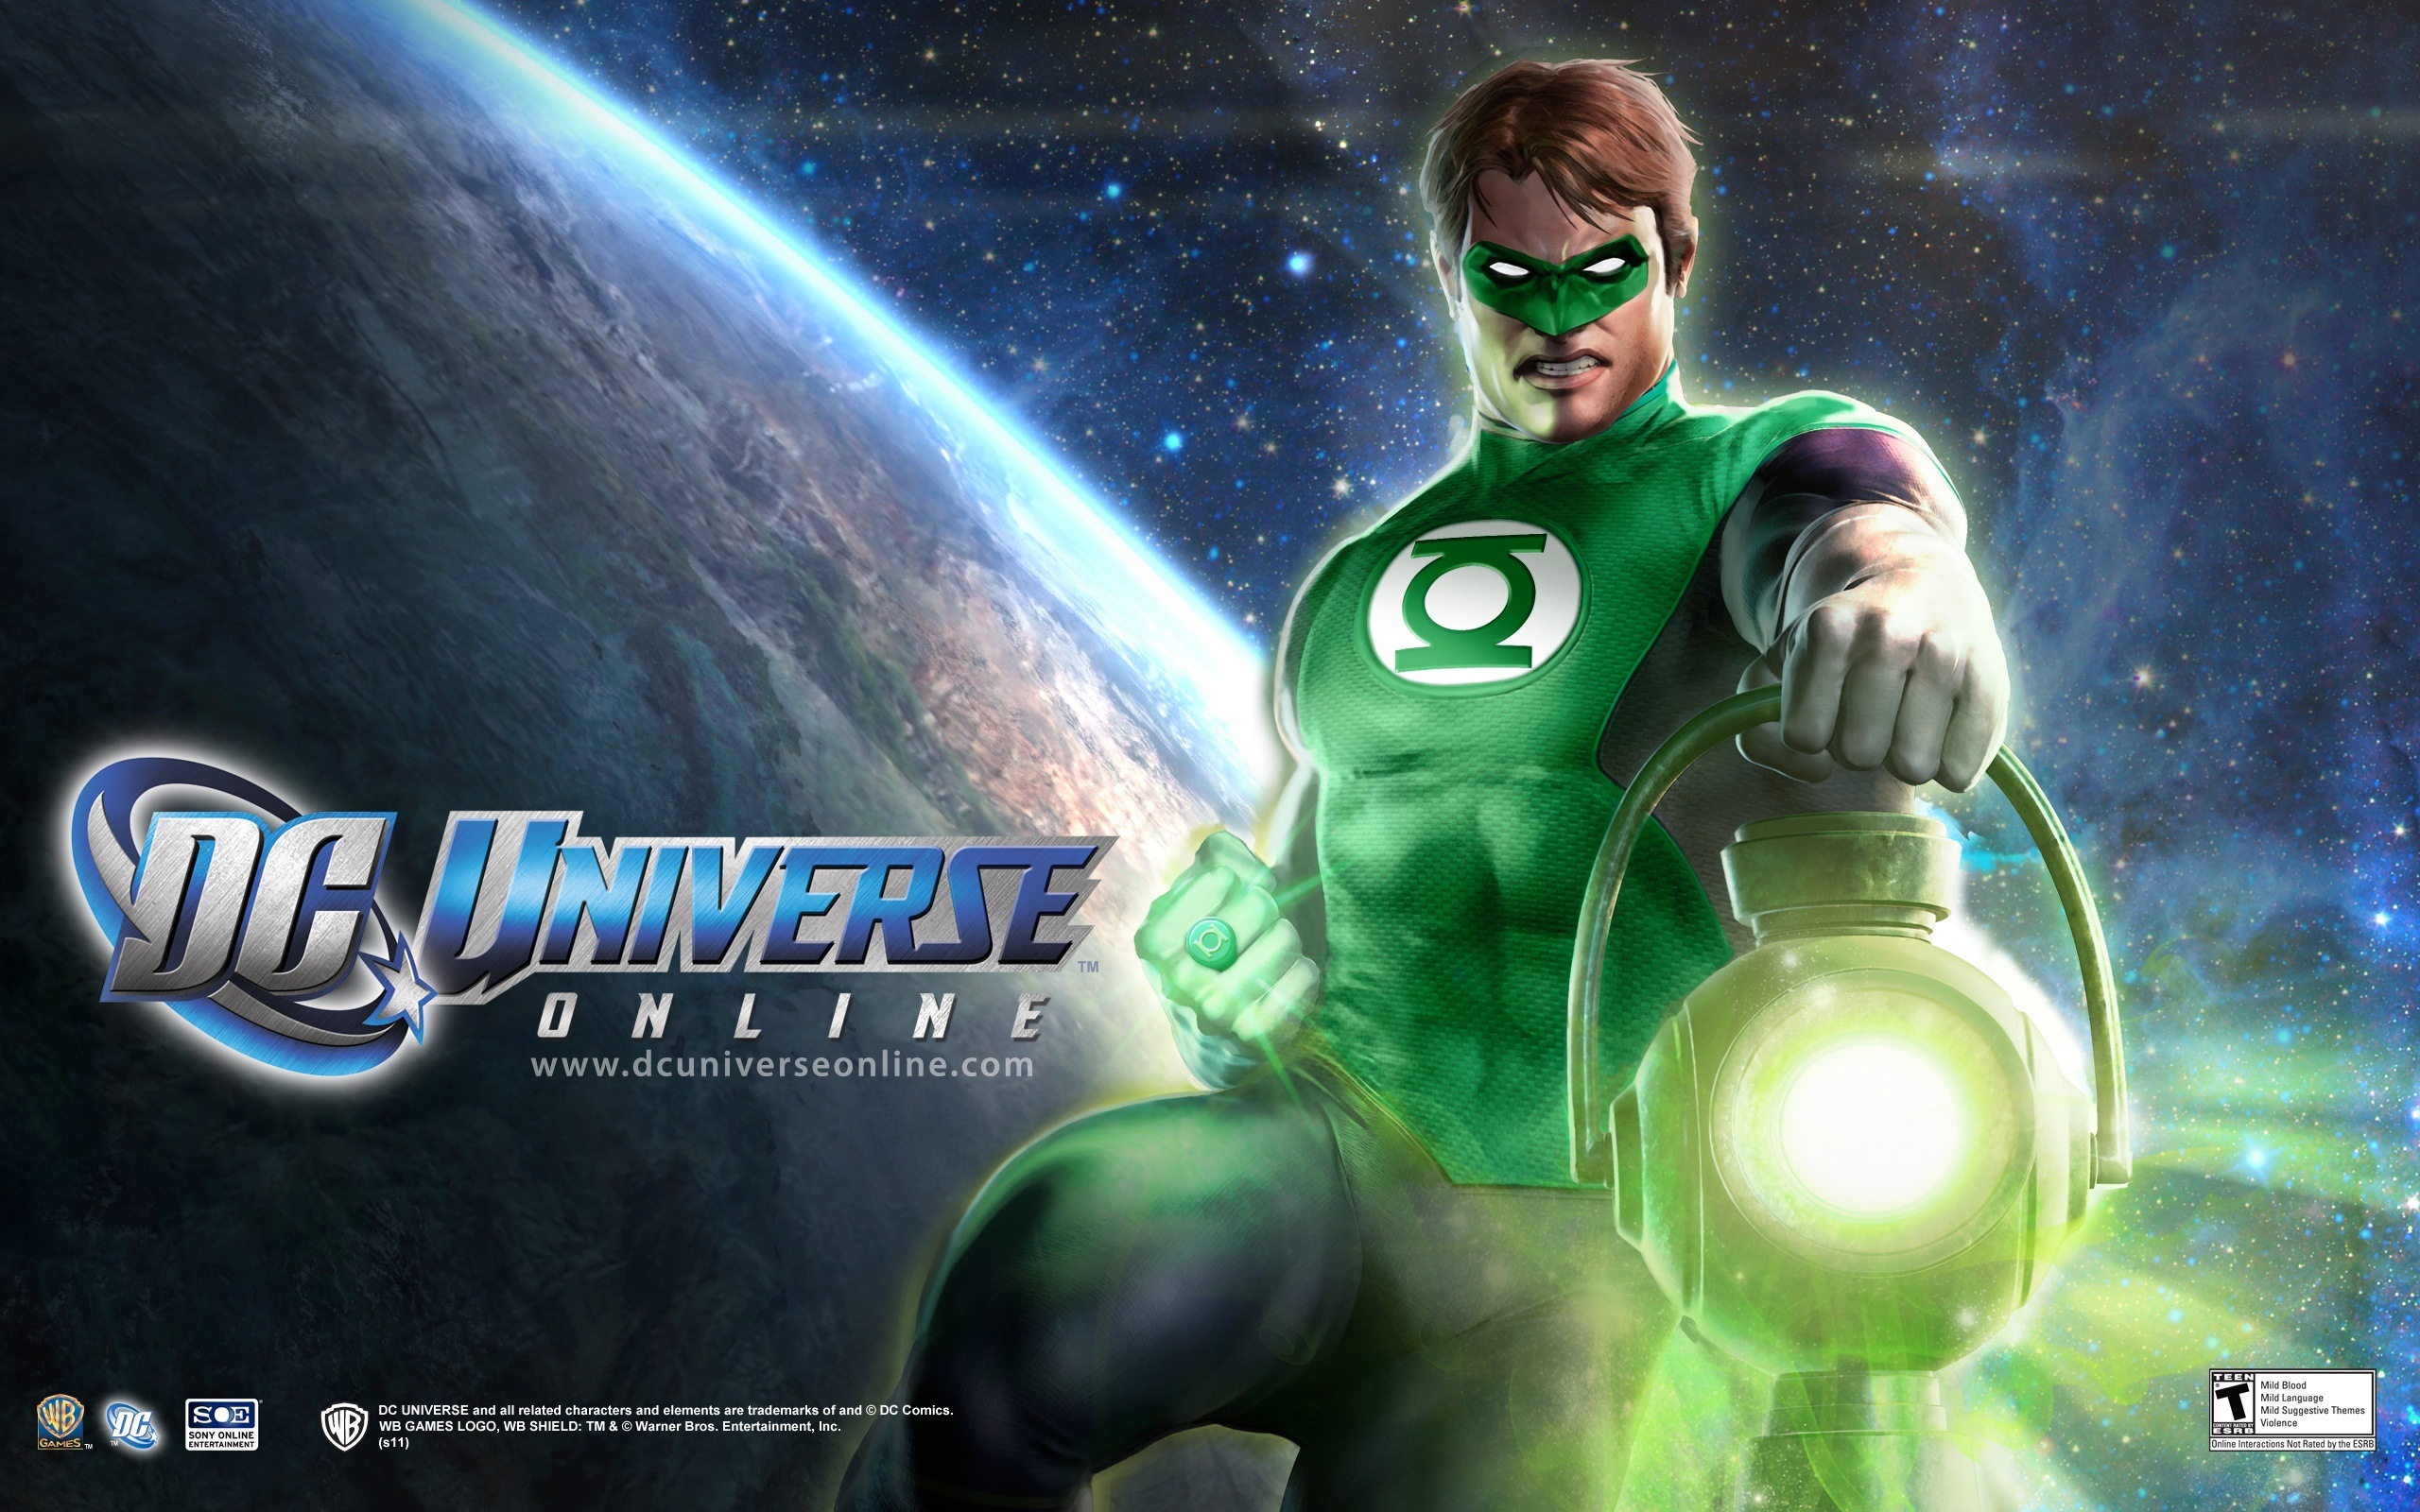 DC Universe Online HD game wallpapers #17 - 2560x1600